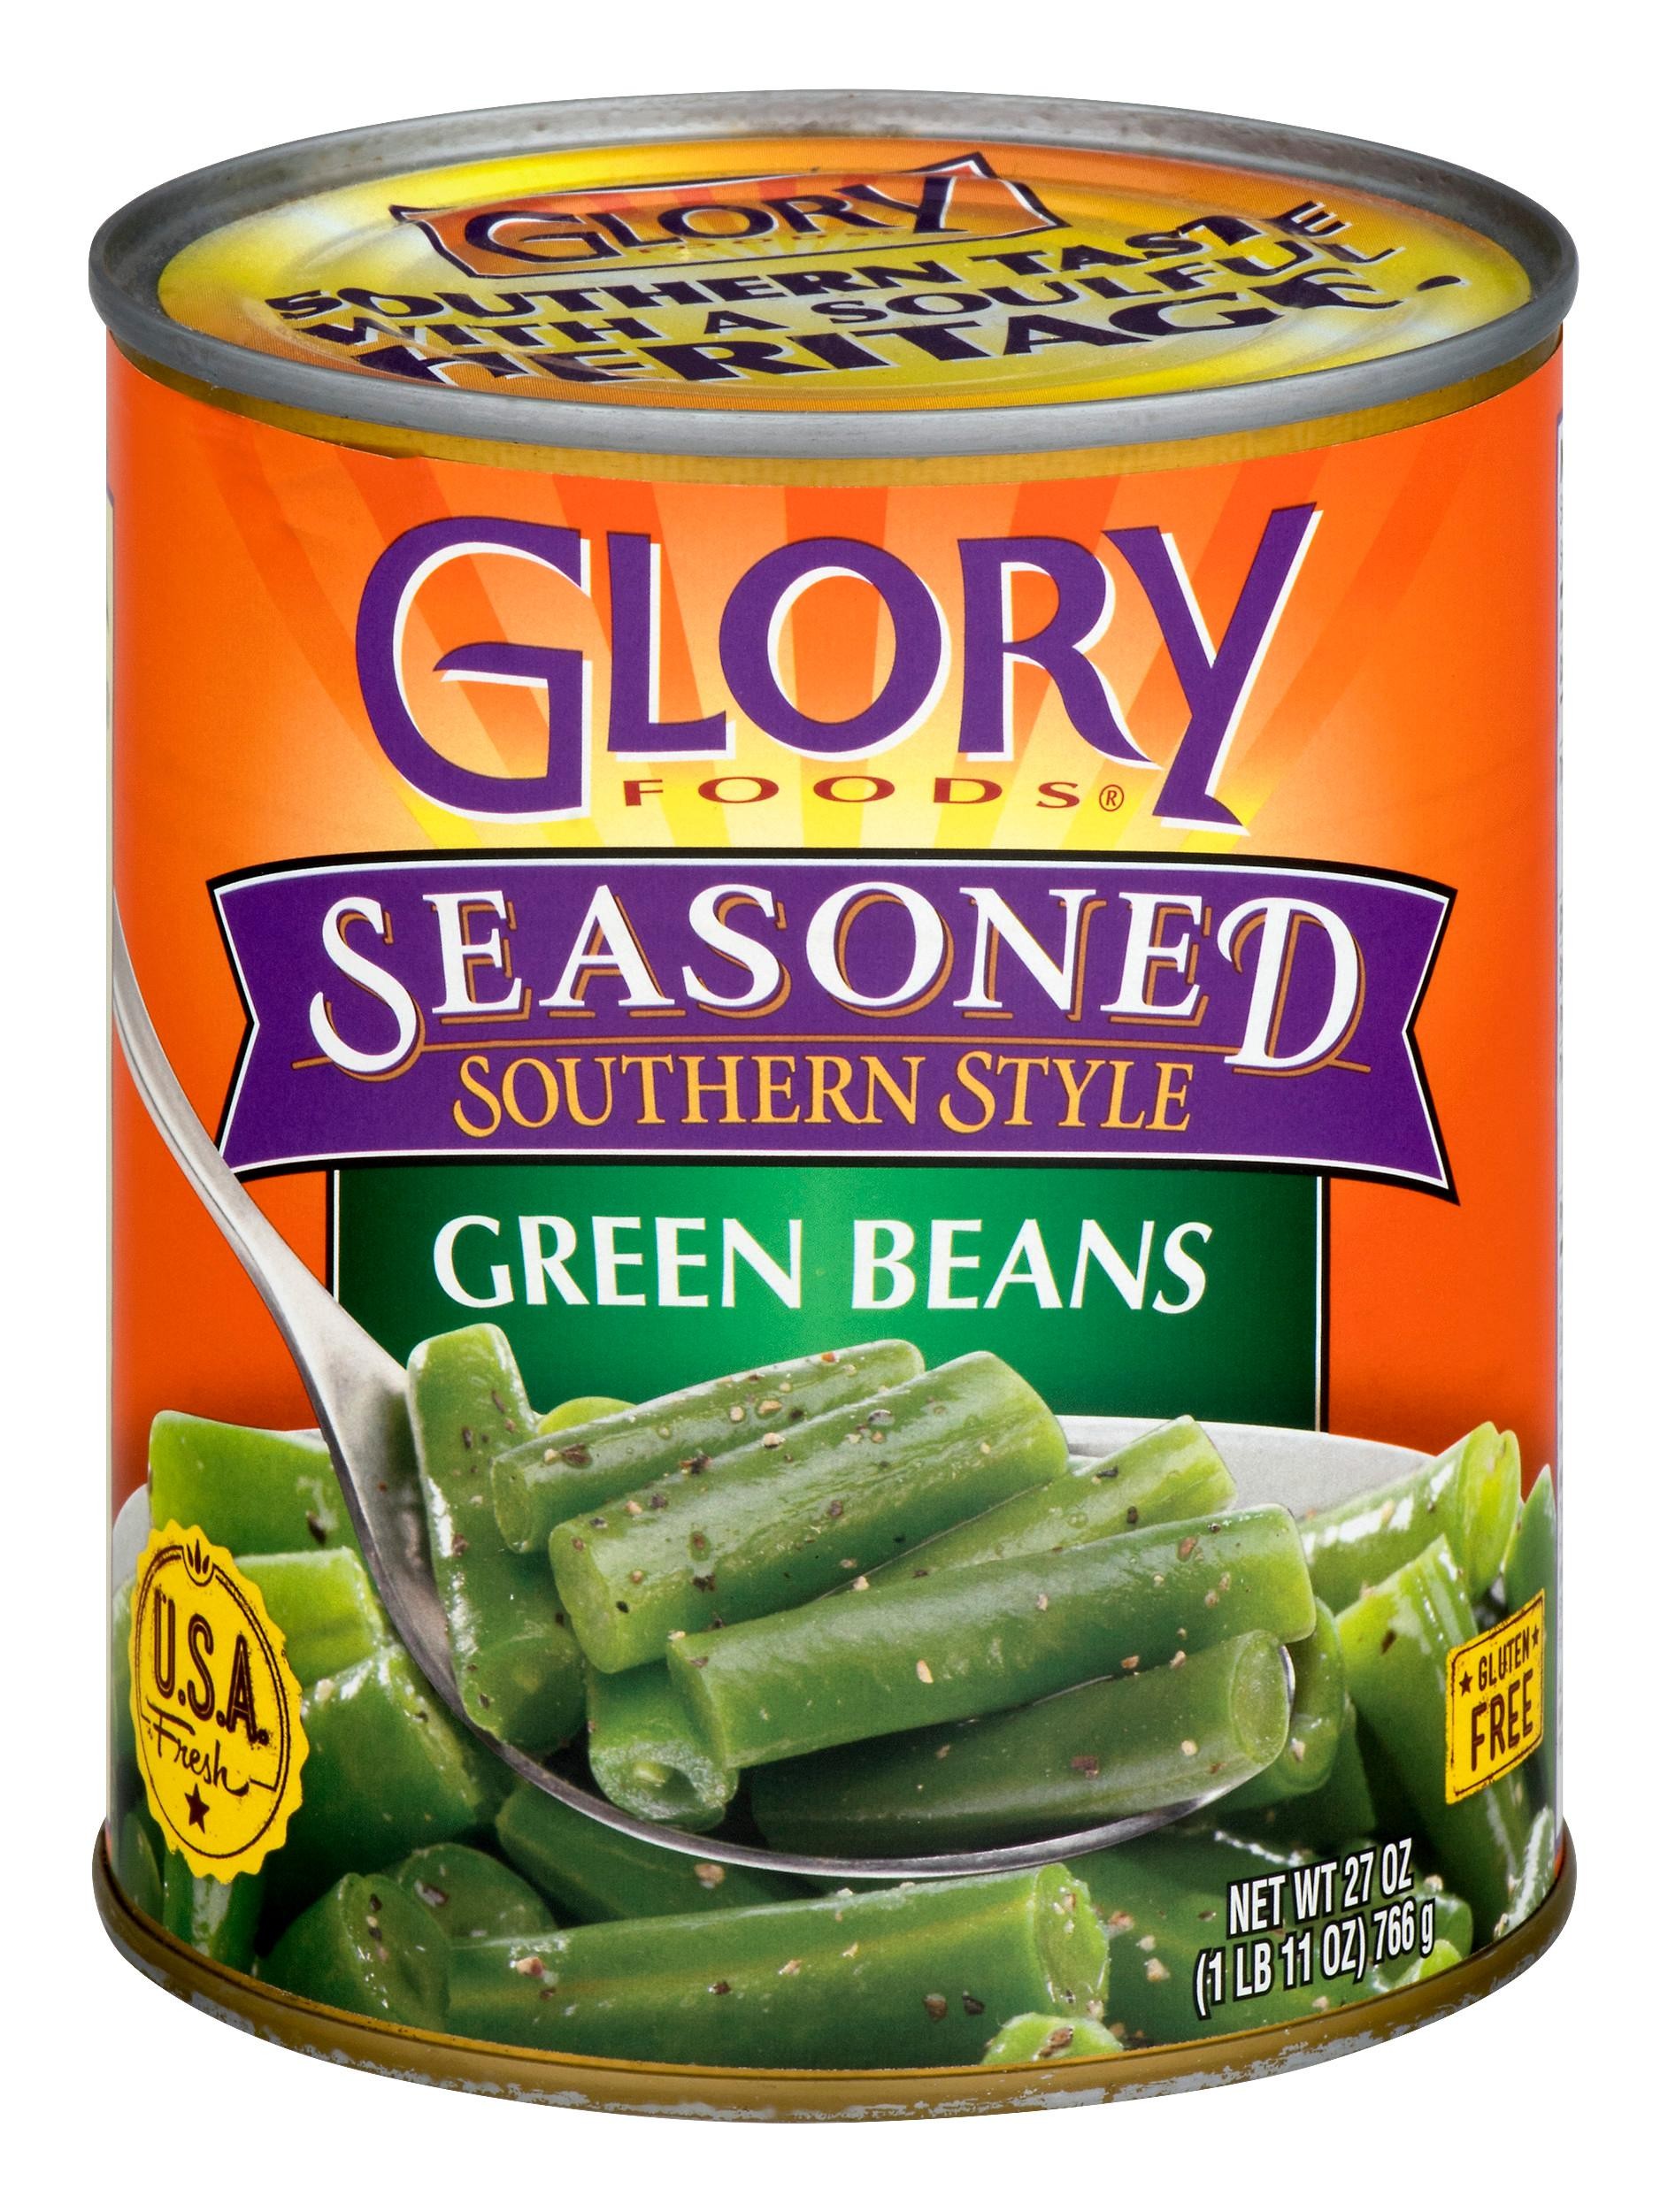 Glory Foods Seasoned Southern Style Green Beans - 27 Oz